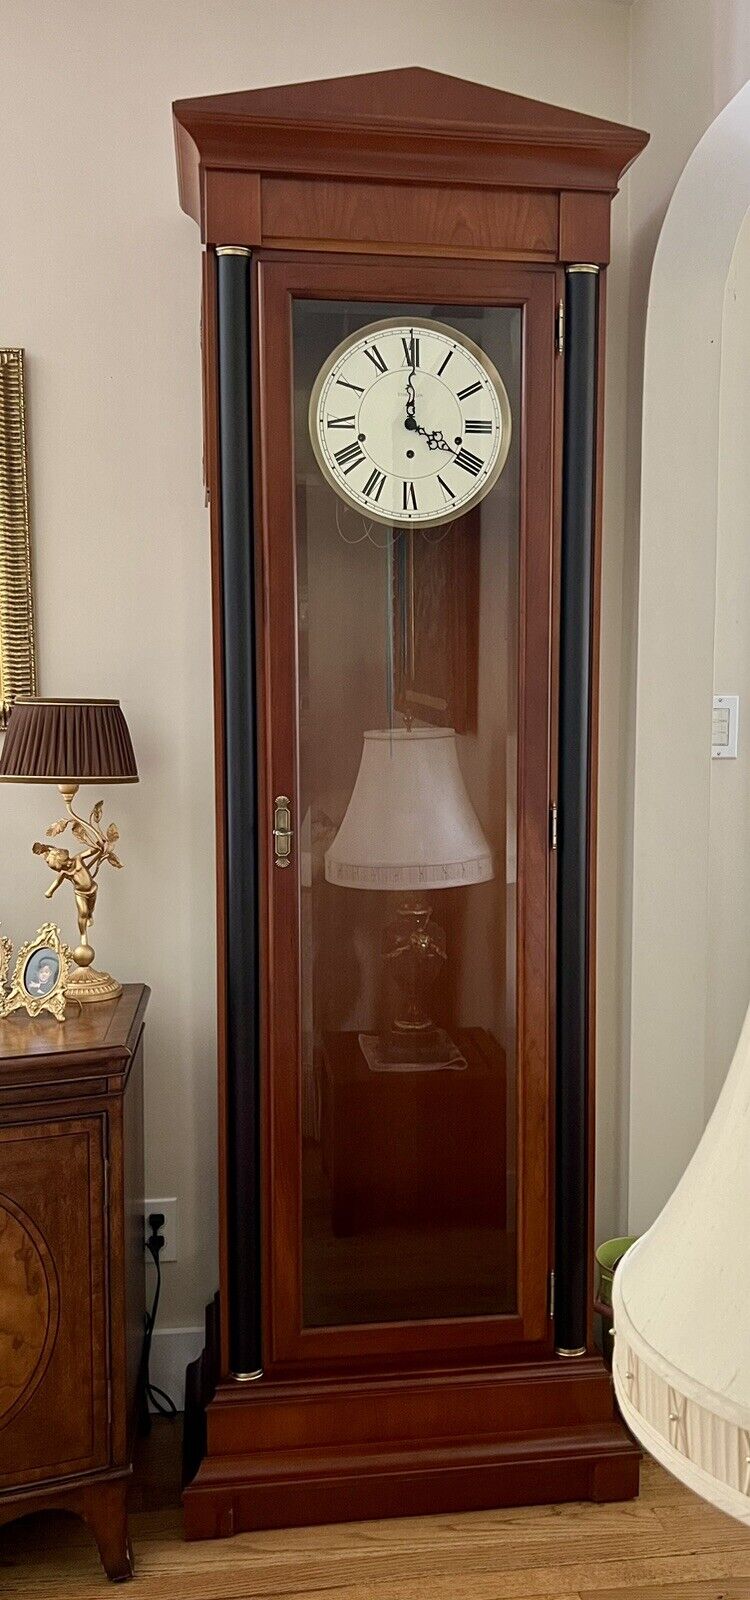 7’ Ethan Allen Grandfather clock - Beautiful And Modern Look